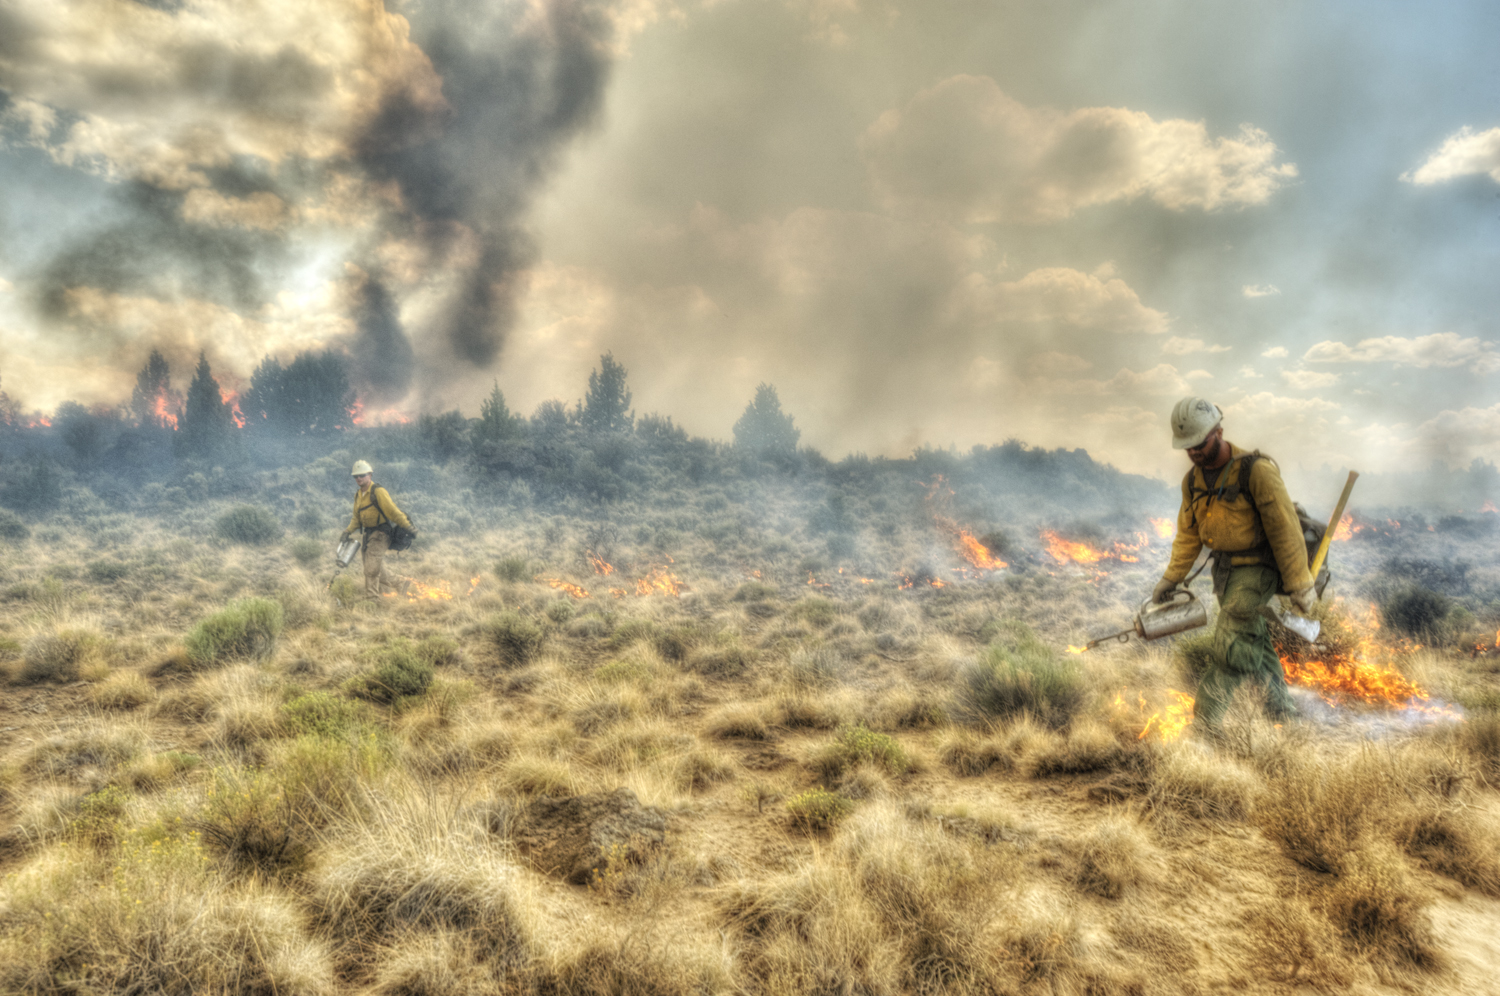 Firefighters walk through smoke and extinguish flames at the Lava Fire.